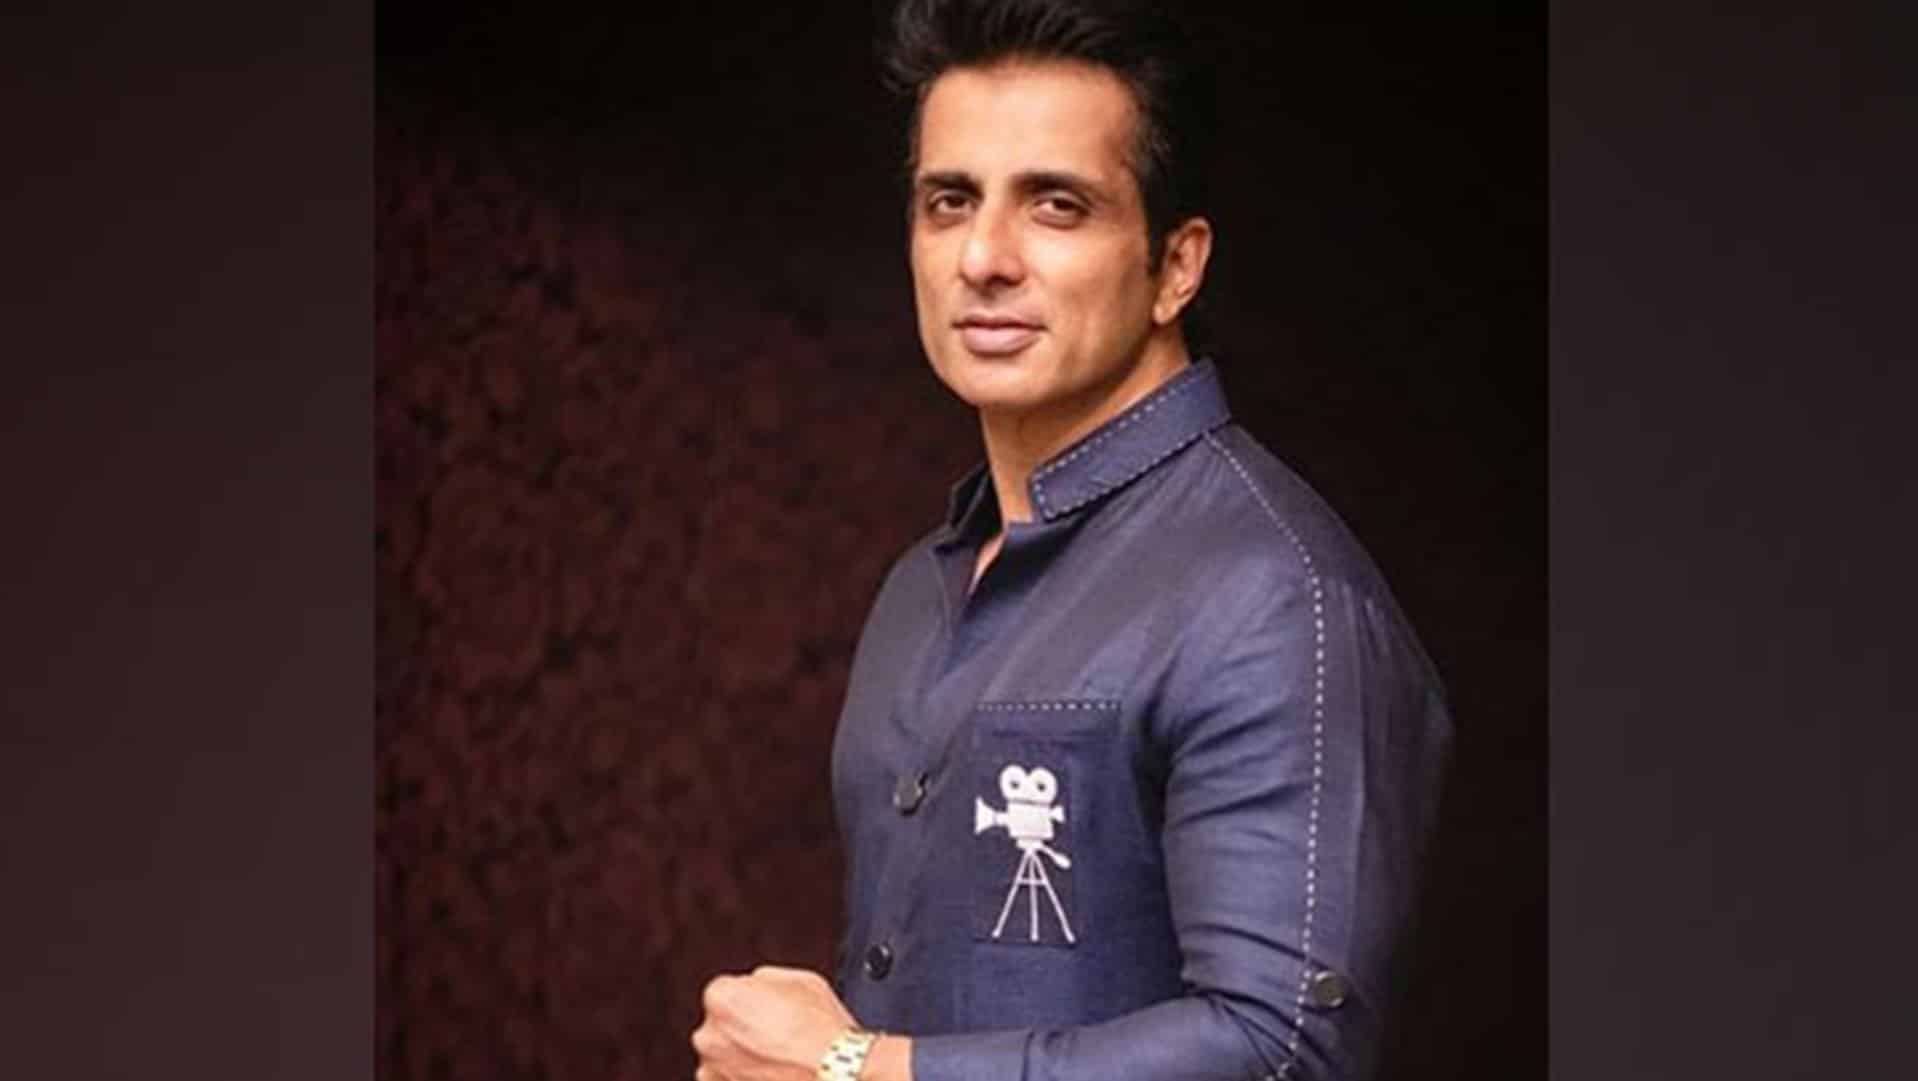 Sonu Sood Mumbai home, office surveyed by Income Tax department